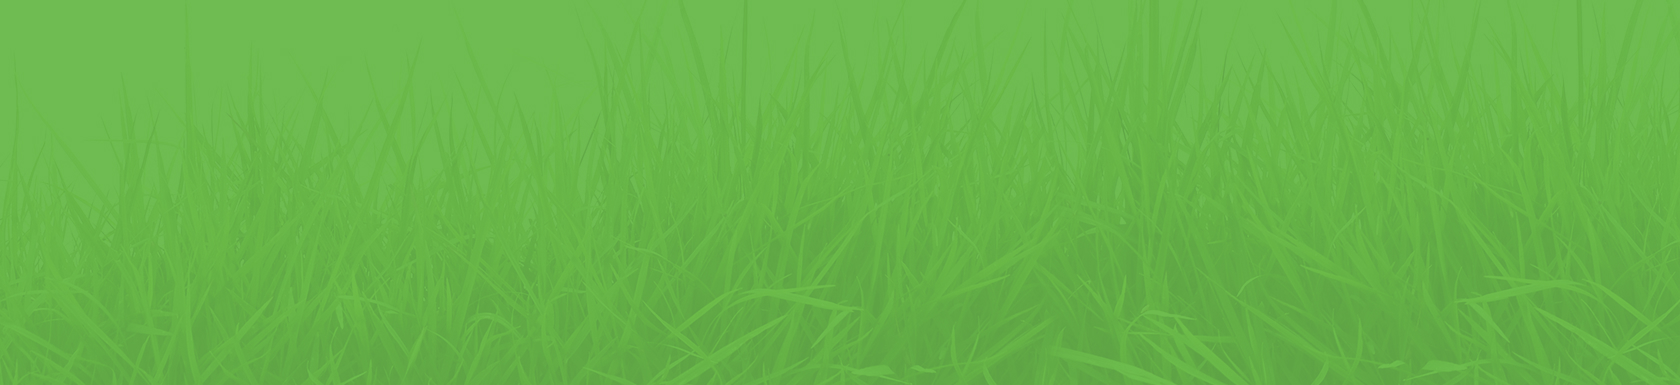 background image of grass